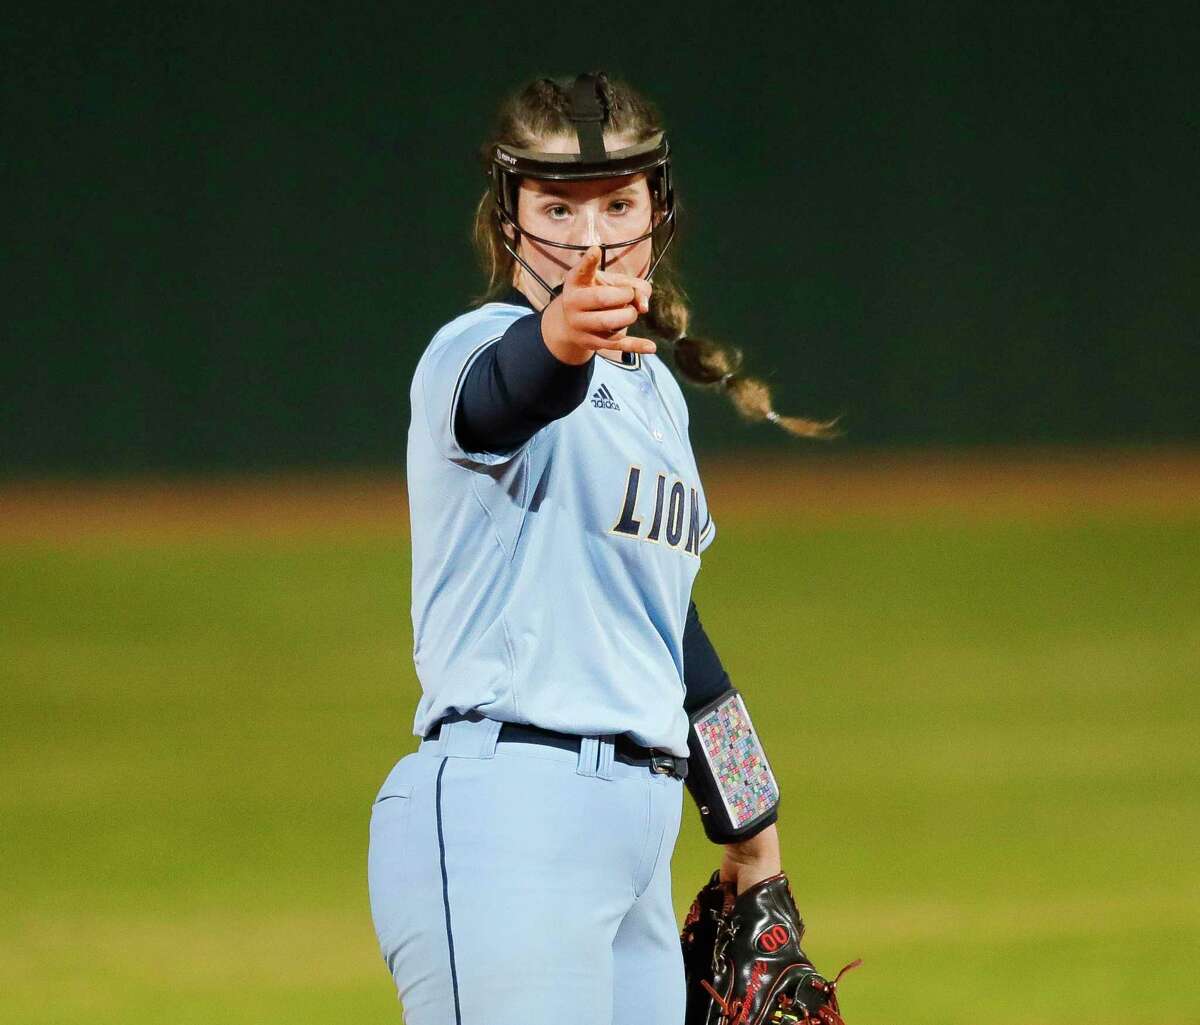 Lake Creek starting pitcher Ava Brown (22), shown here last month, tossed a perfect game Thursday night at Kingwood Park.